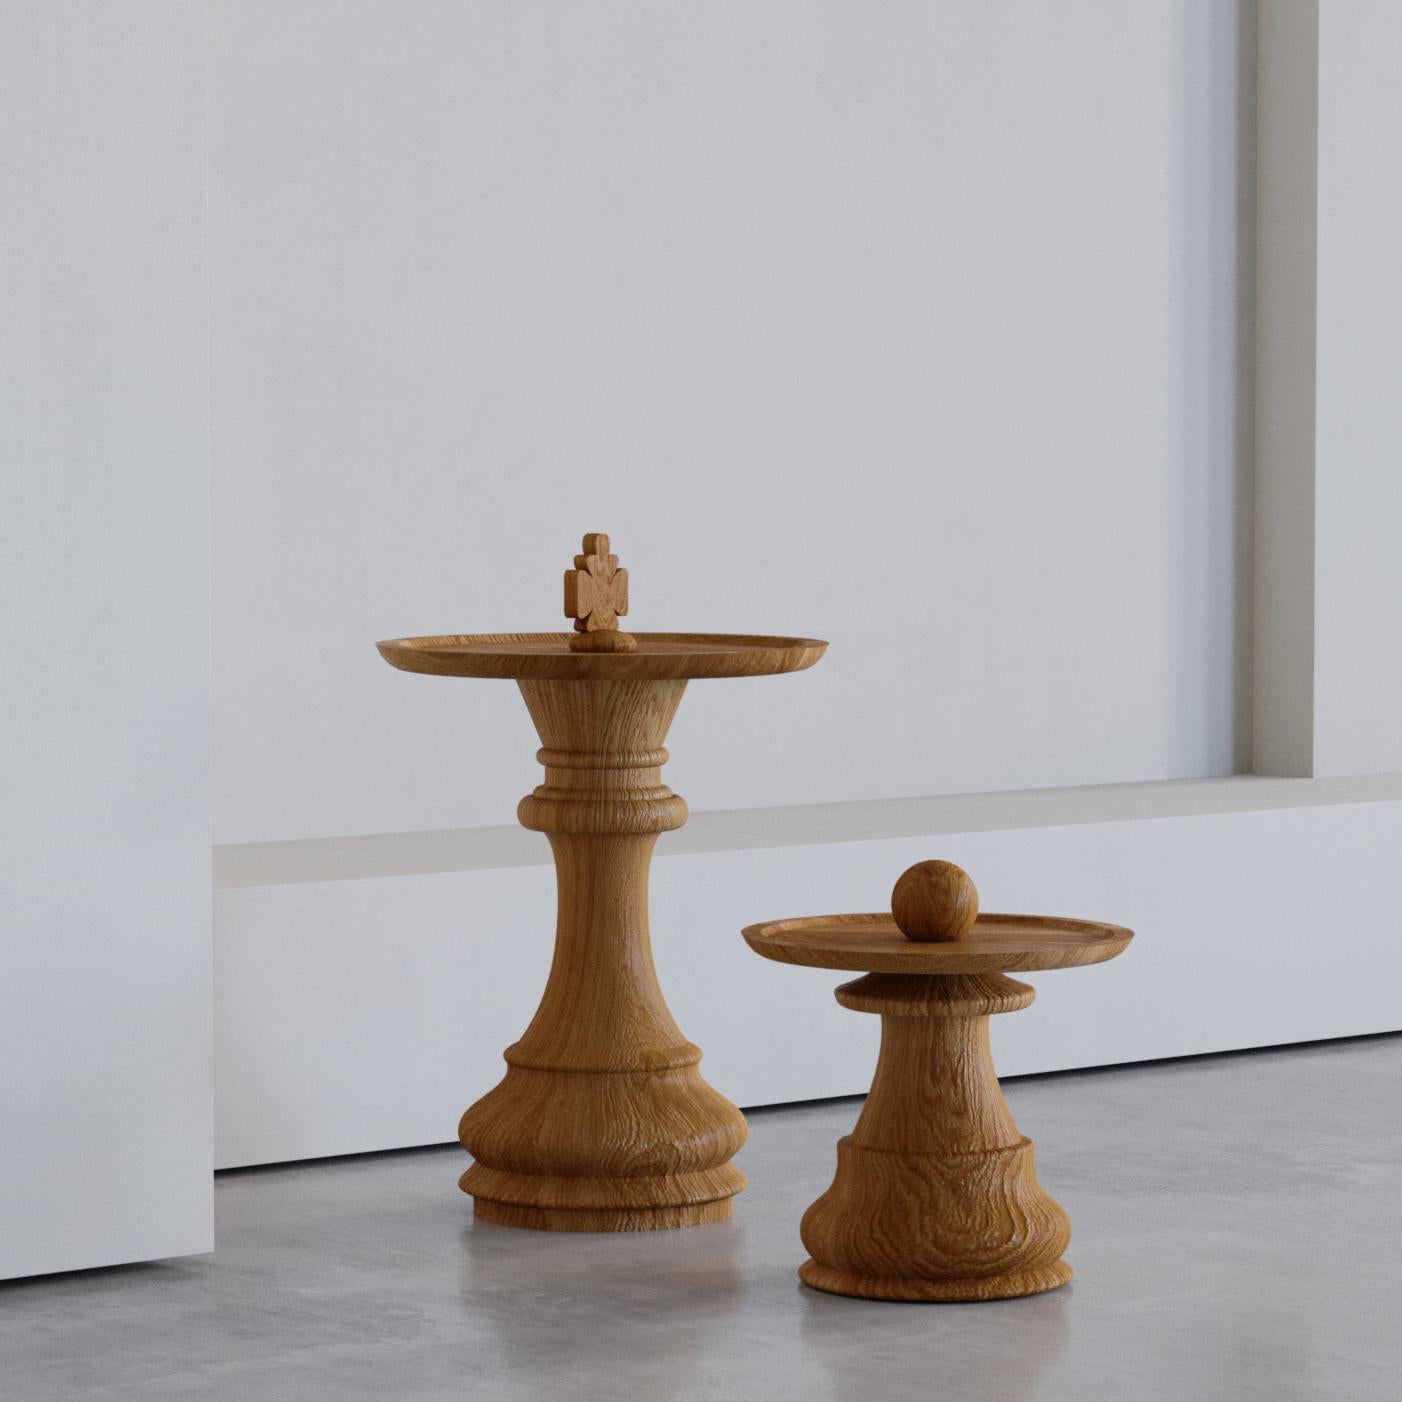 Derived from the classical forms of chess pieces,Piyon sidetable bring innovation to your space with their sculptural and unique presence. These pedestals represent an unconventional approach to furniture design and add a distinctive character to